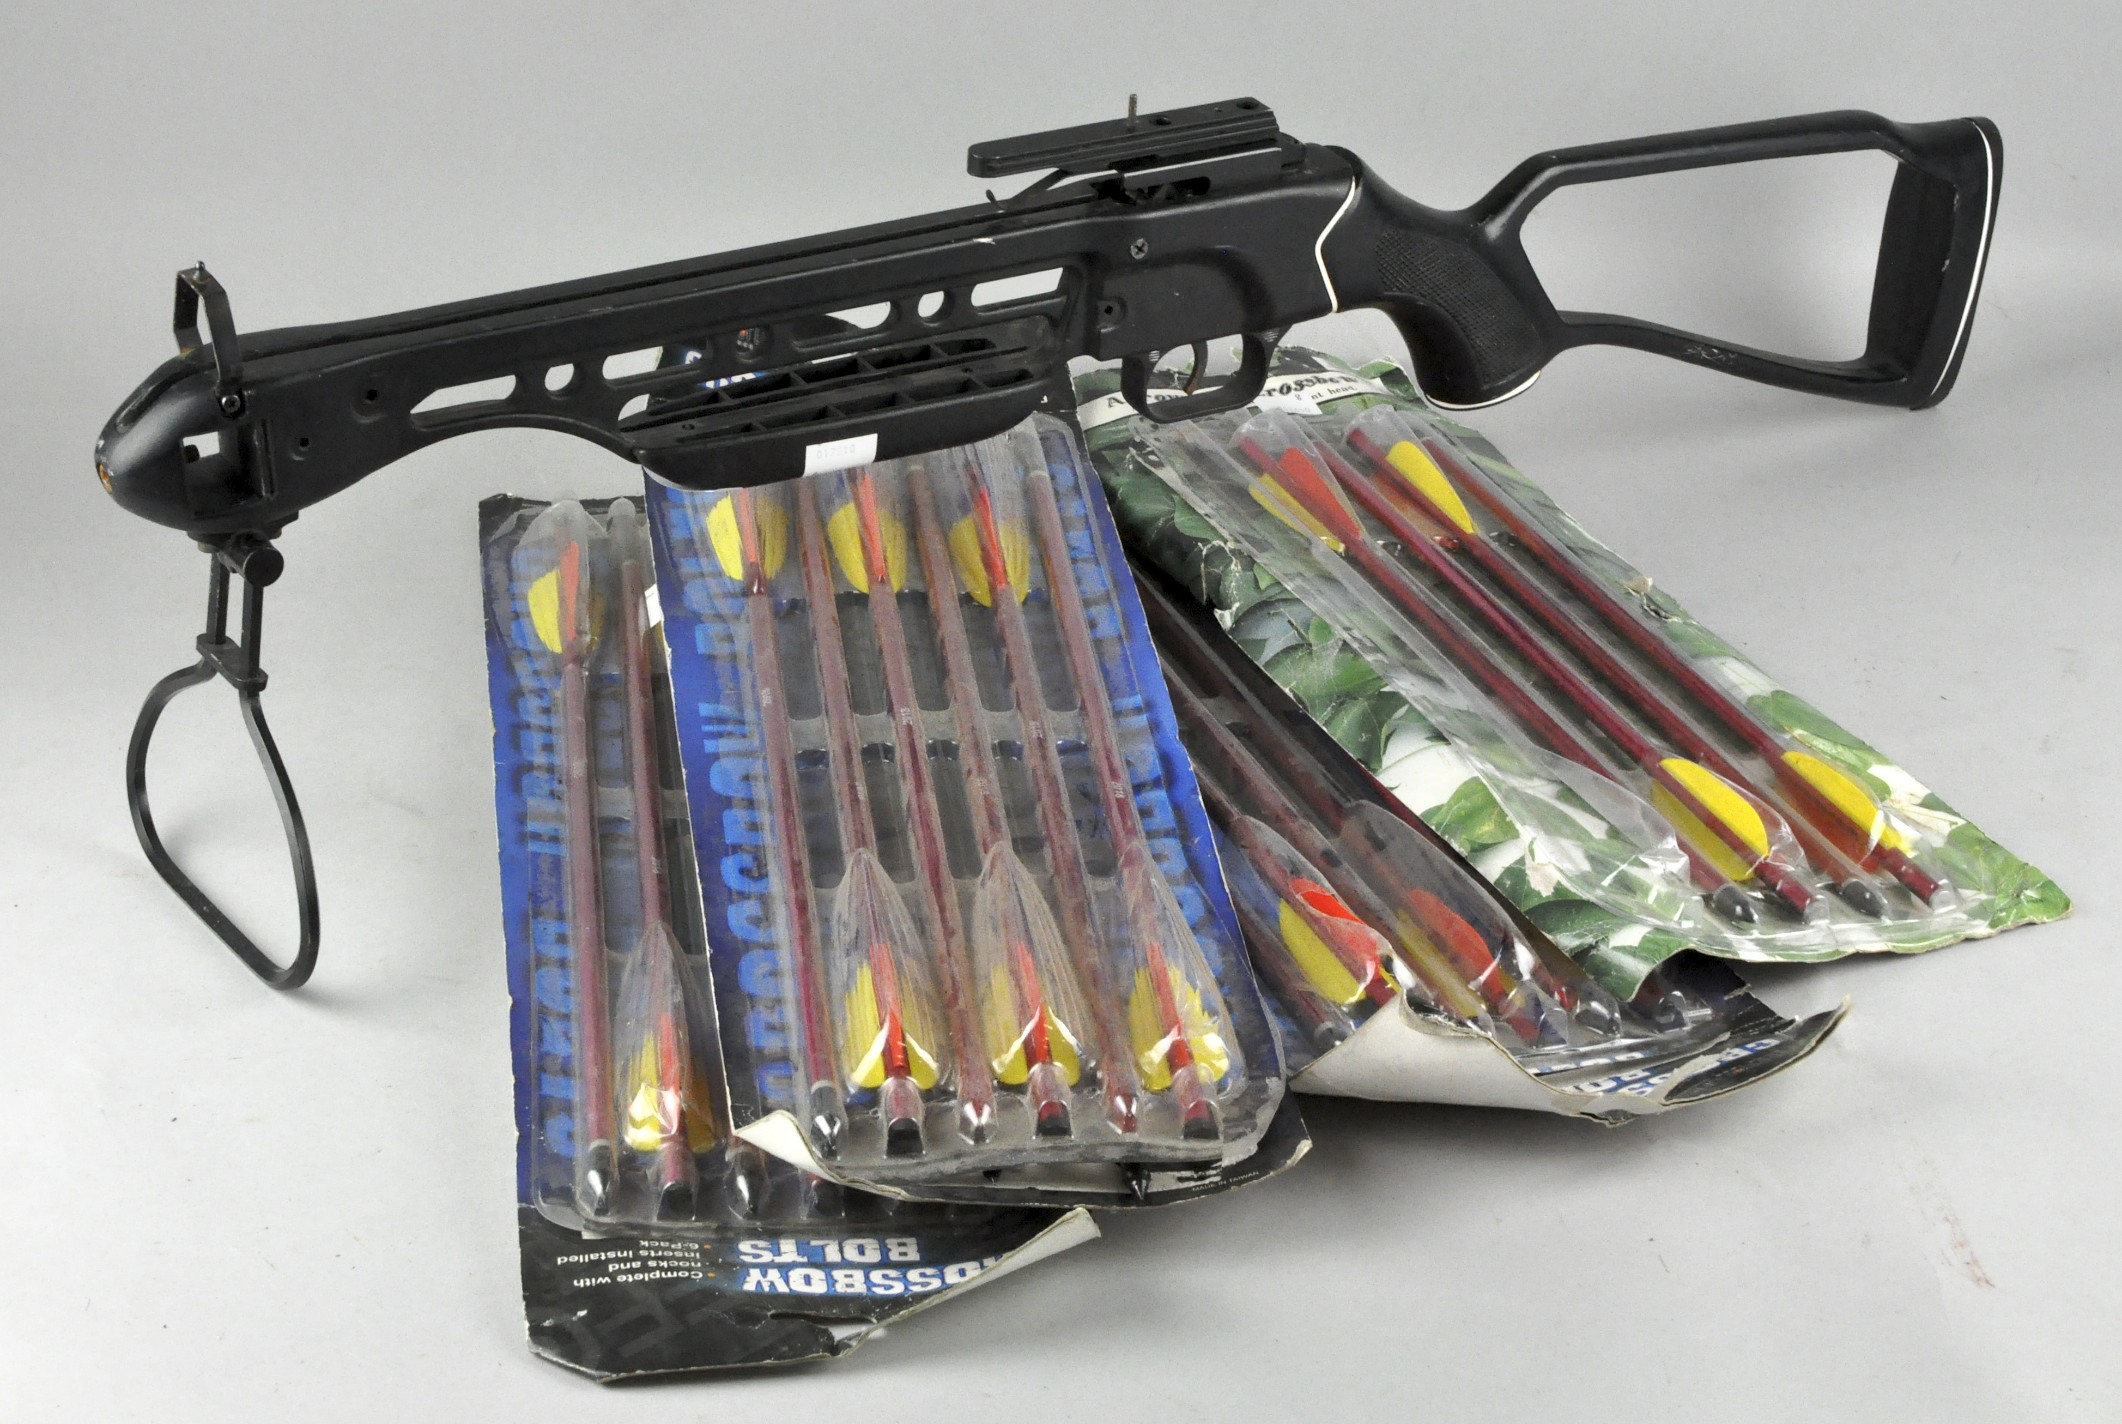 A crossbow with several packets of crossbow bolts